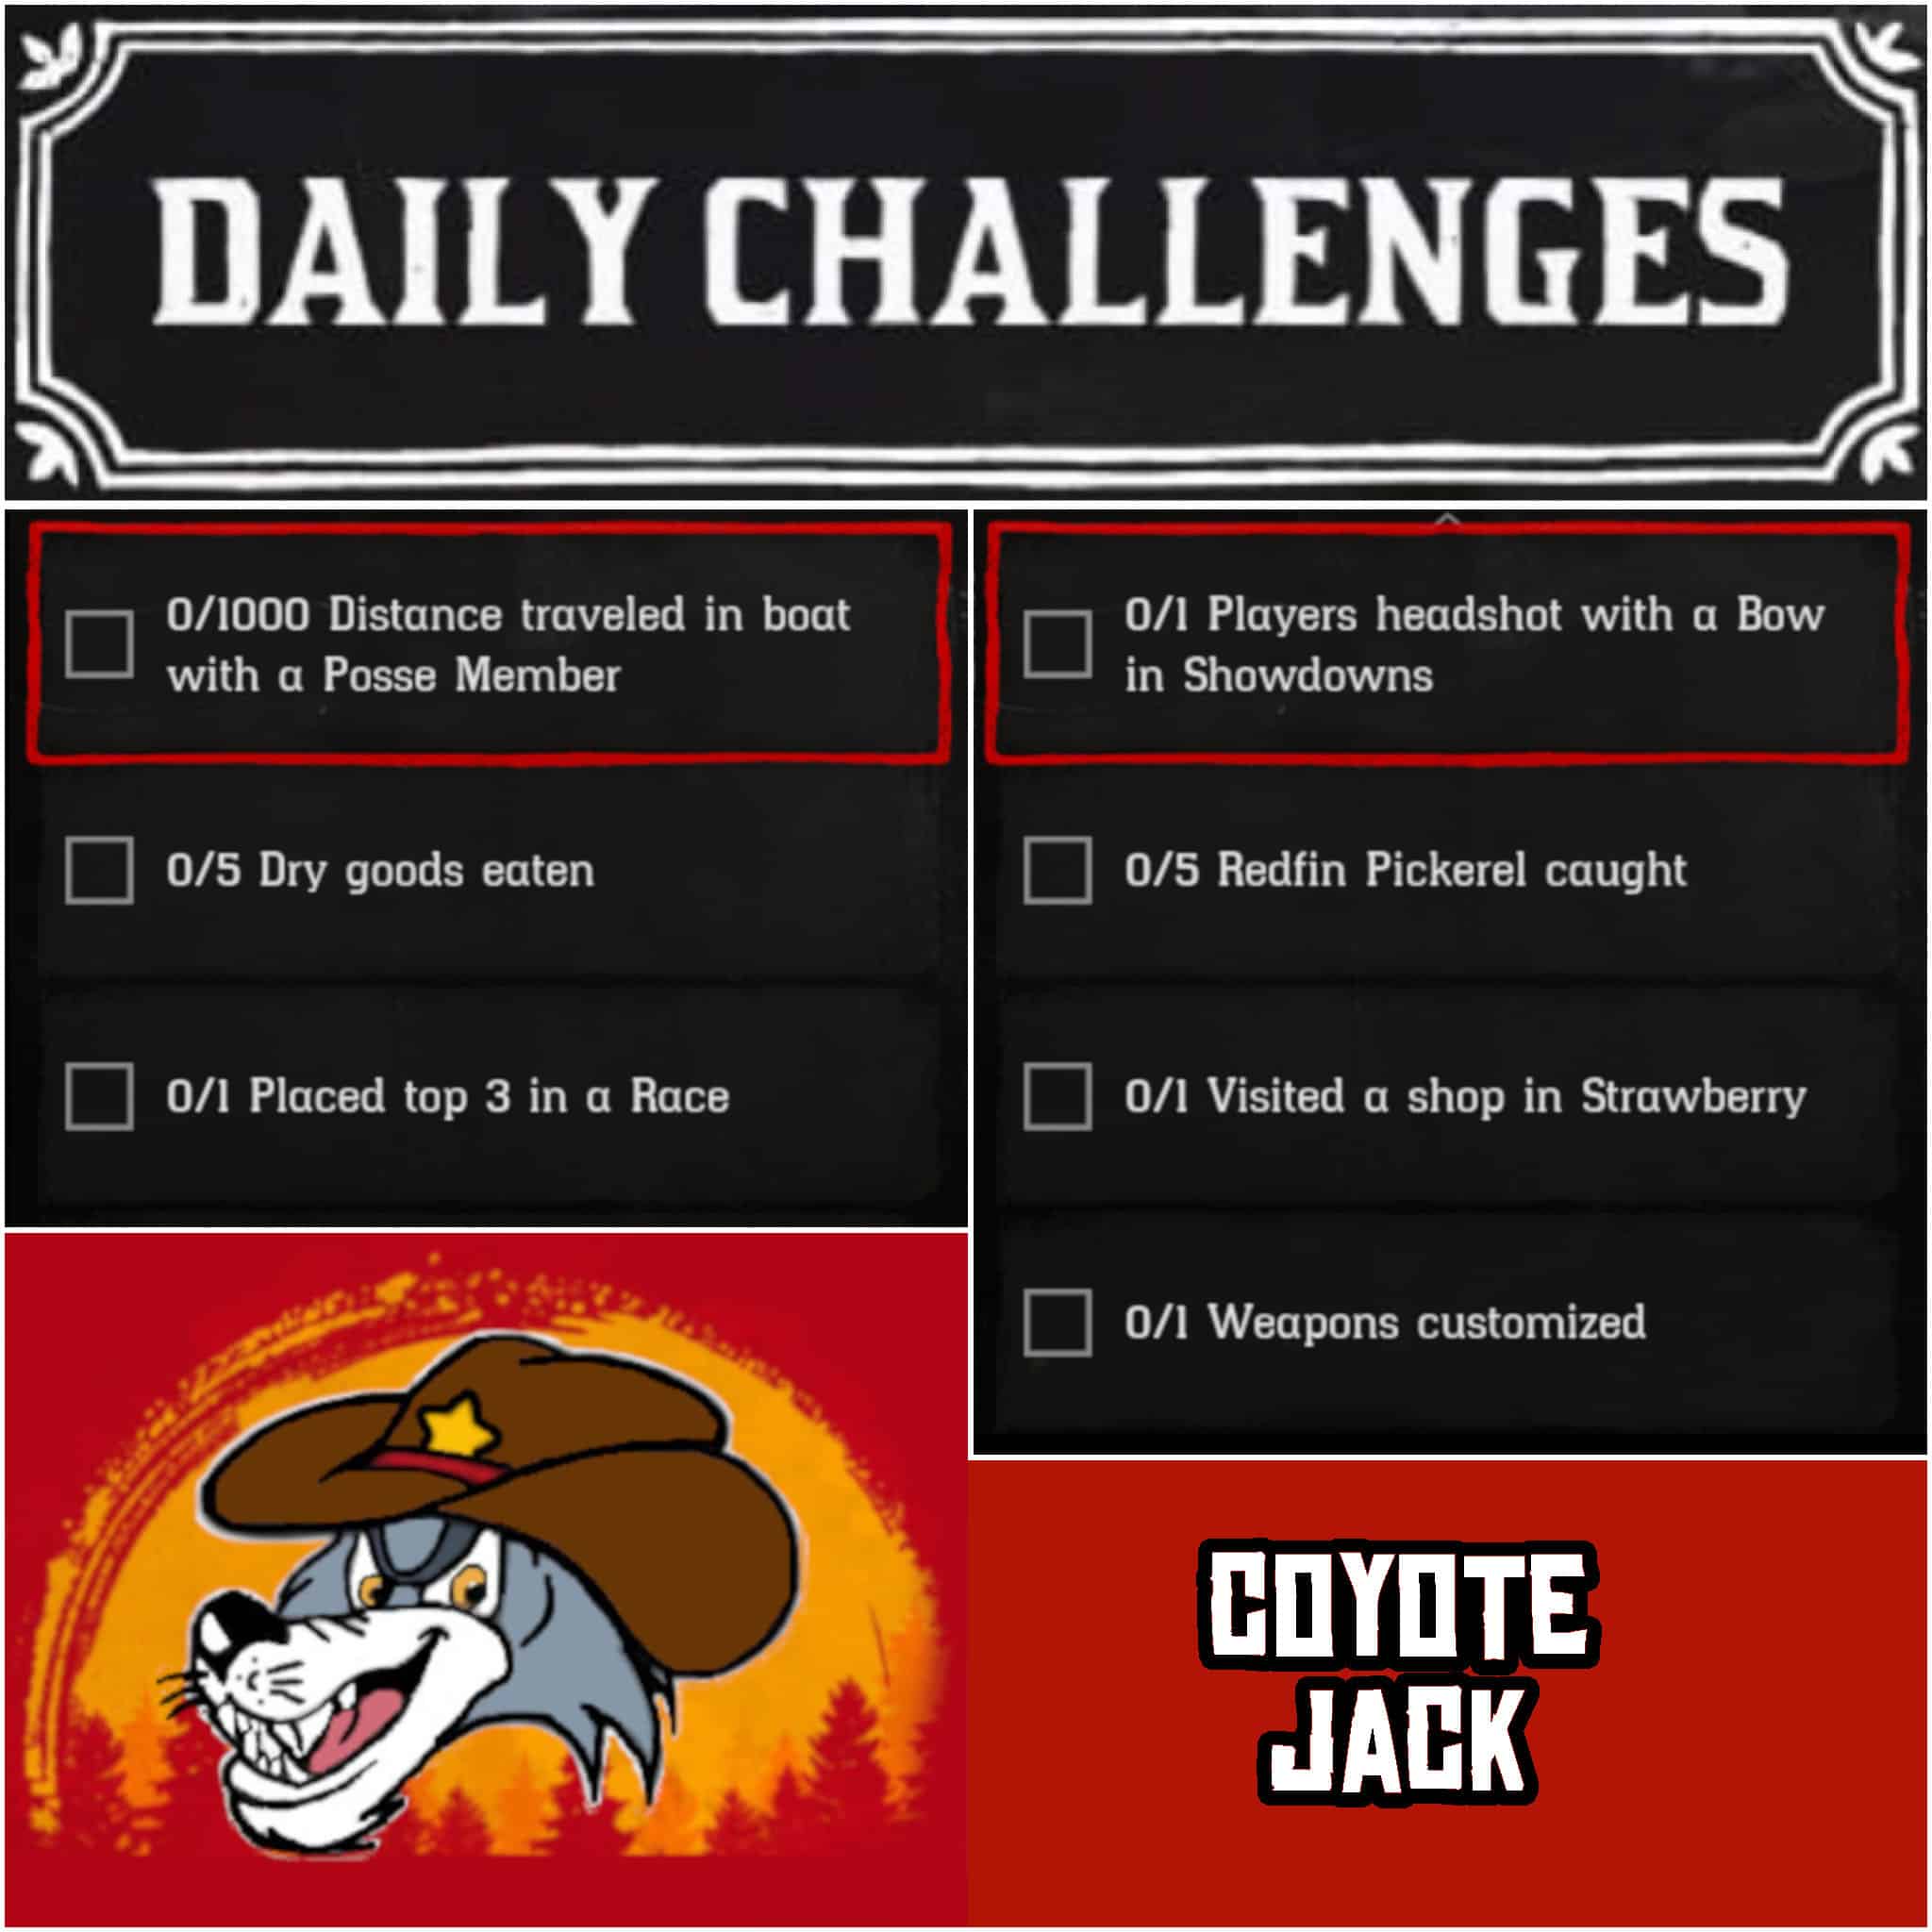 You are currently viewing Thursday 17 December Daily Challenges